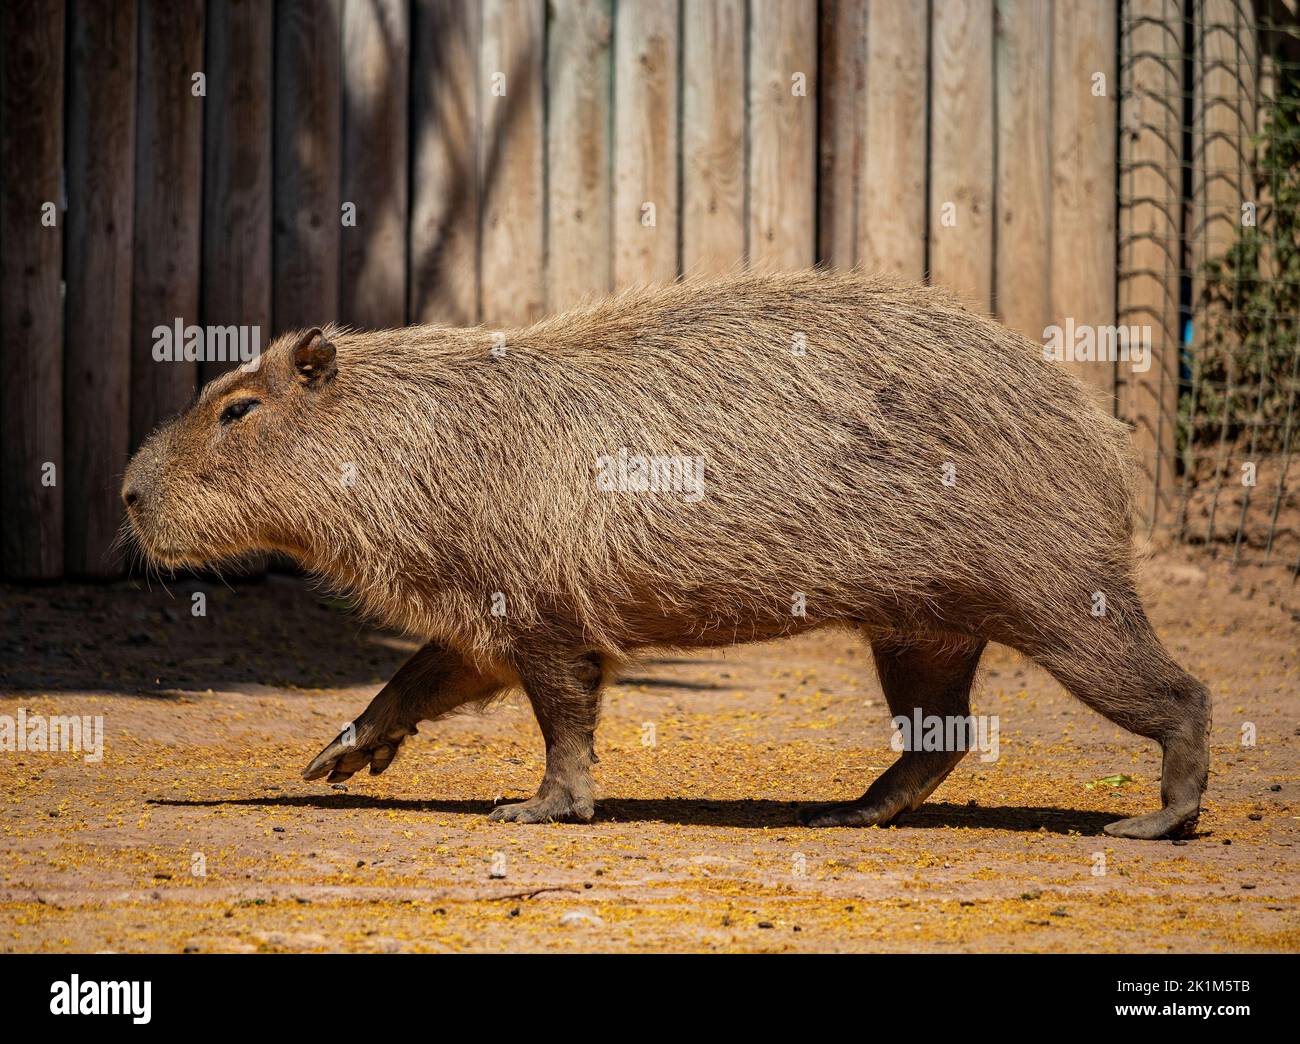 A large capybara with red and brown fur, seen in profile, walking on all fours. Stock Photo